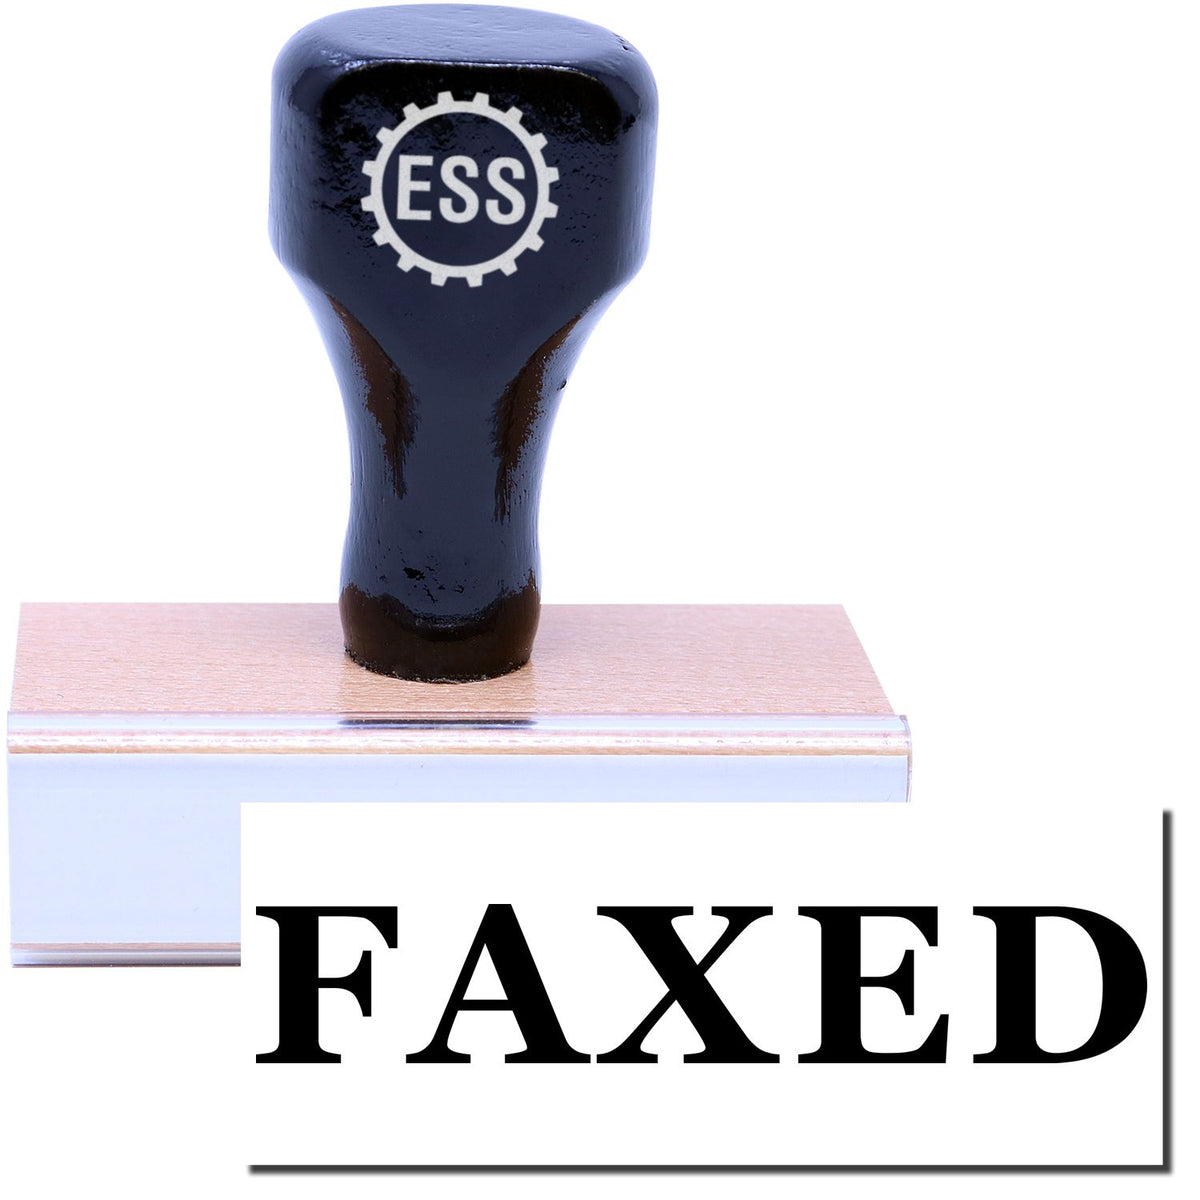 A stock office rubber stamp with a stamped image showing how the text &quot;FAXED&quot; in a large times font is displayed after stamping.